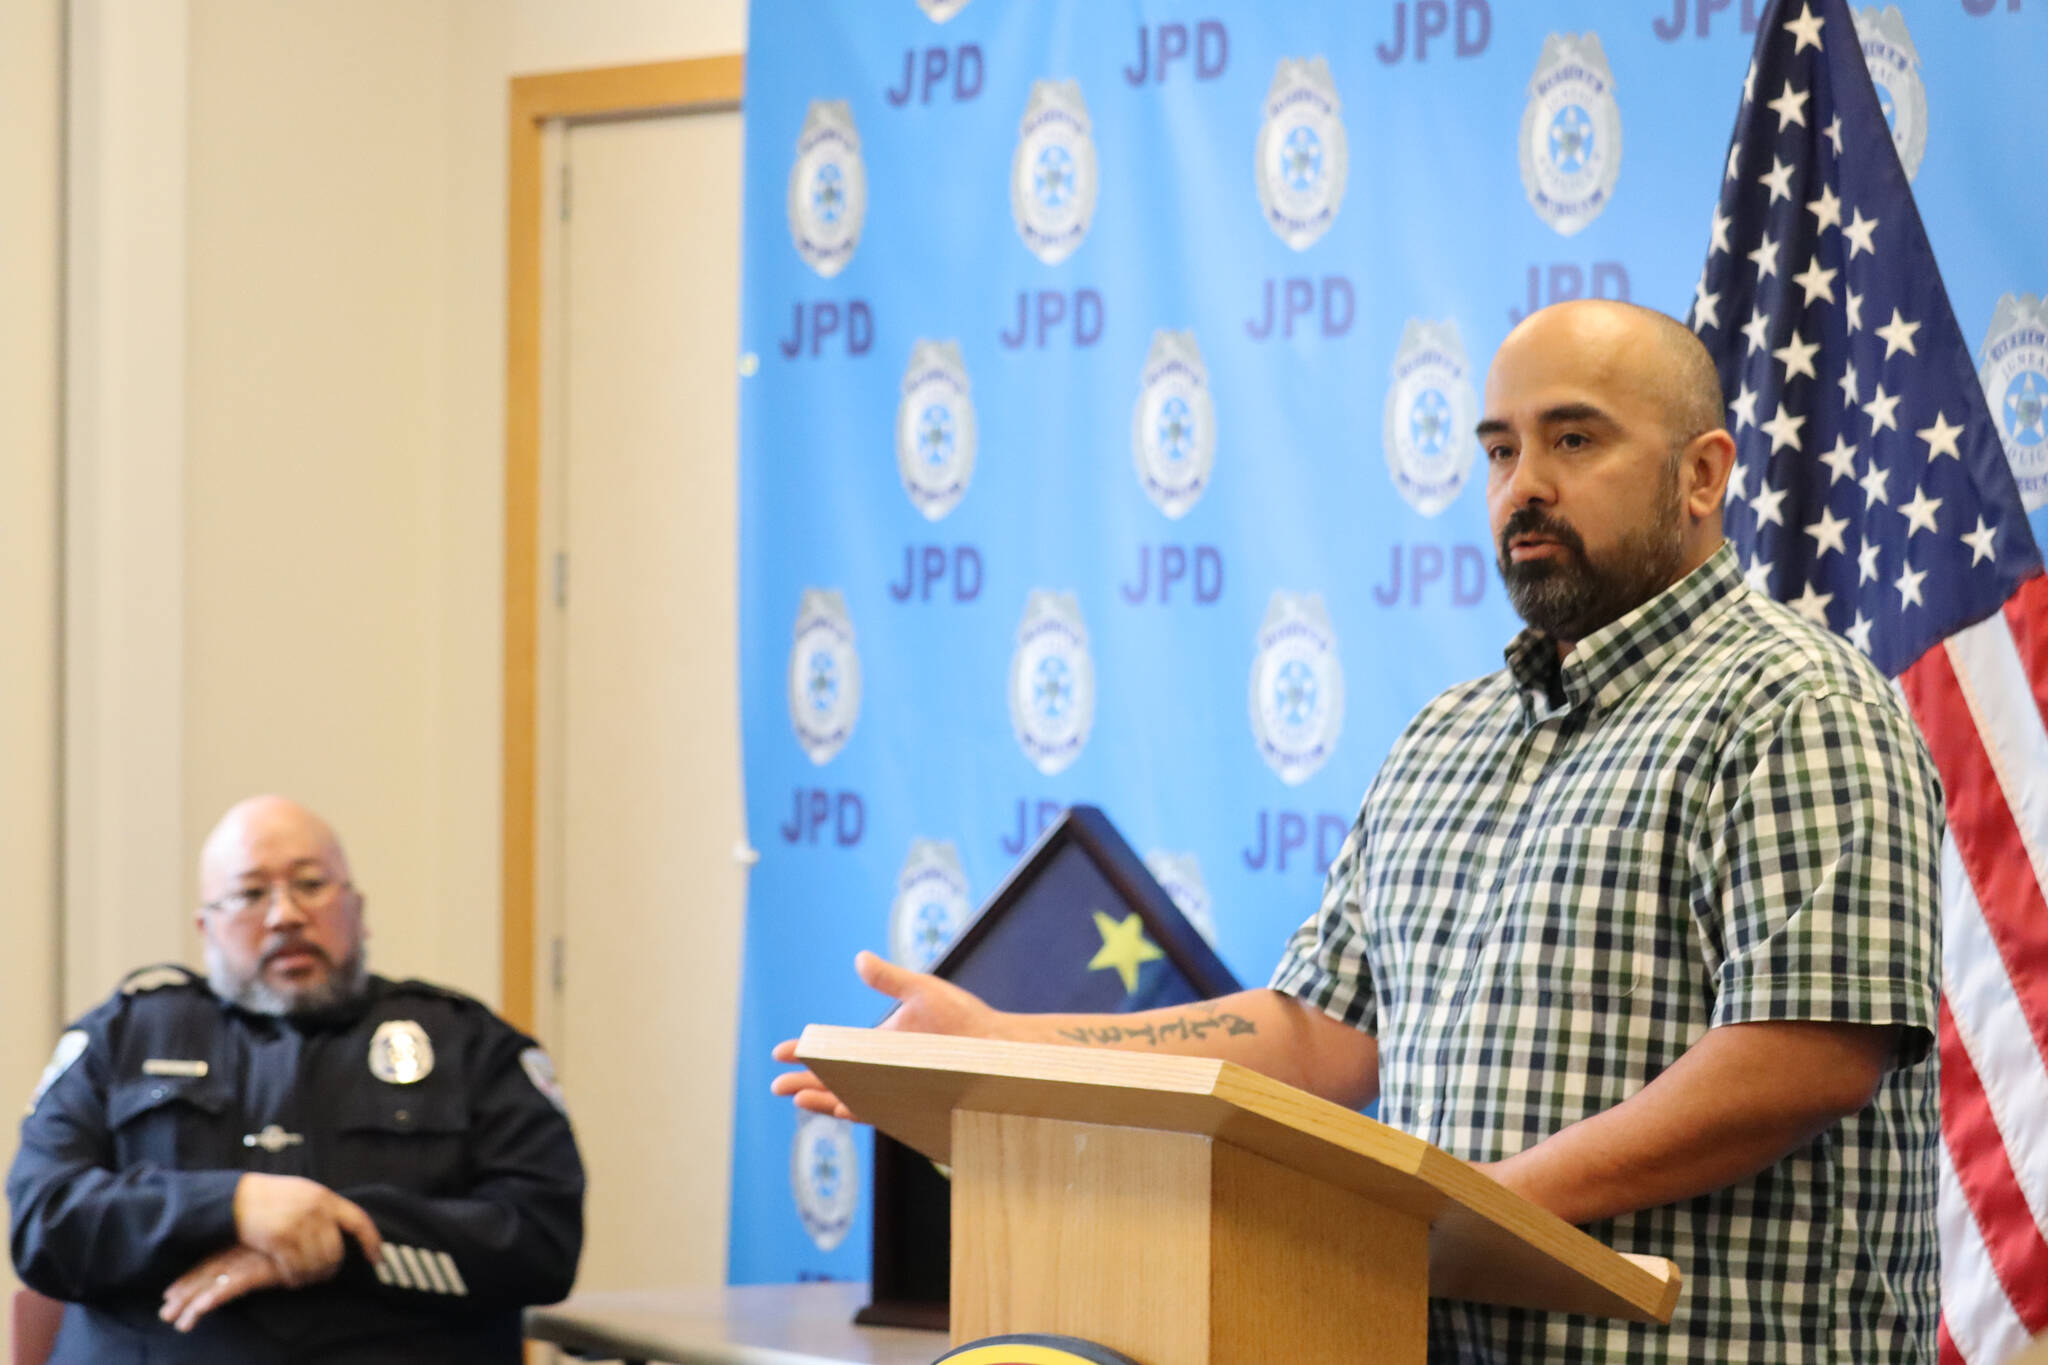 JPD Officer Nick Garza addresses the large crowd of attendees at Officer Kevin Fermin’s retirement ceremony of Friday to share heart-warming stories of his time served in the department during Fermin’s 25 years of service. (Jonson Kuhn / Juneau Empire)